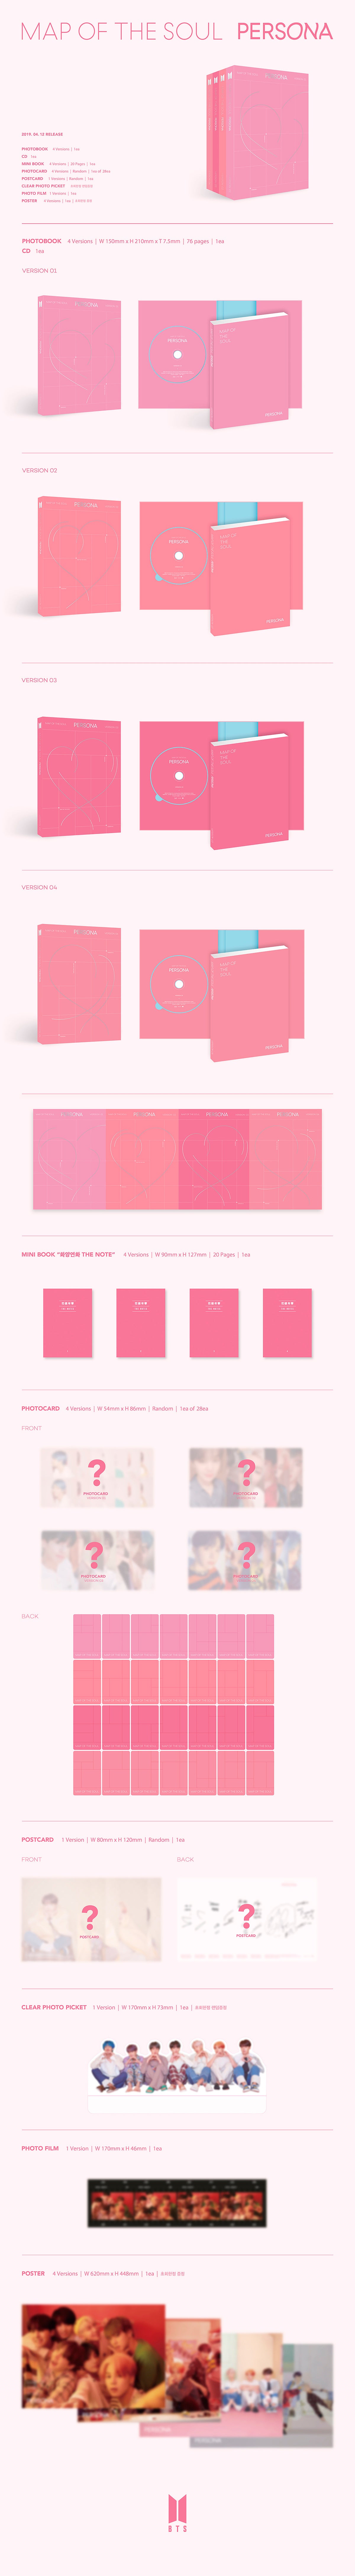 BTS Map of the Soul Persona Infographic Photocards Poster CD Booklet Guide Version 1 2 3 4 Pre Order April